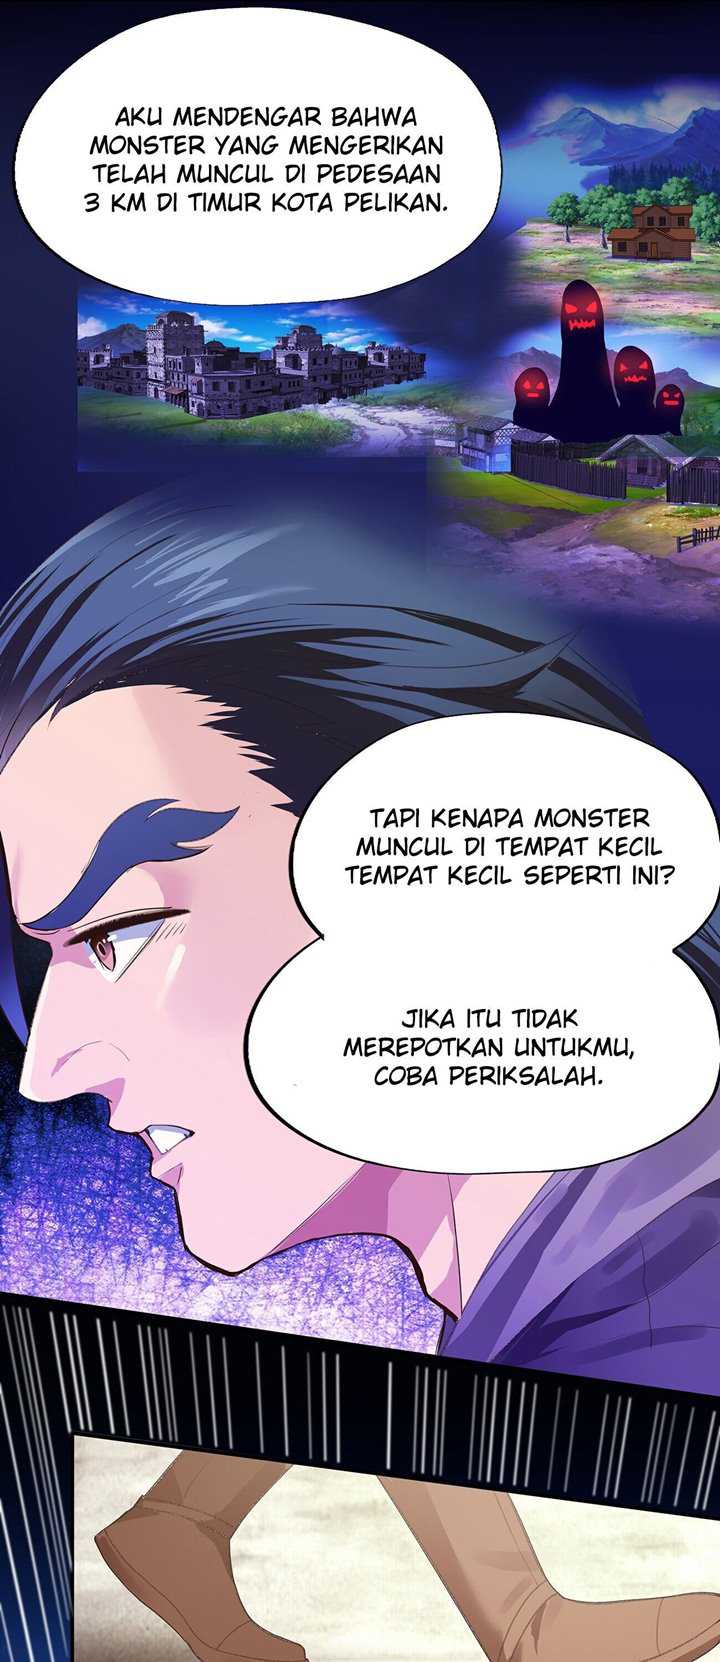 Money Is Justice Chapter 02